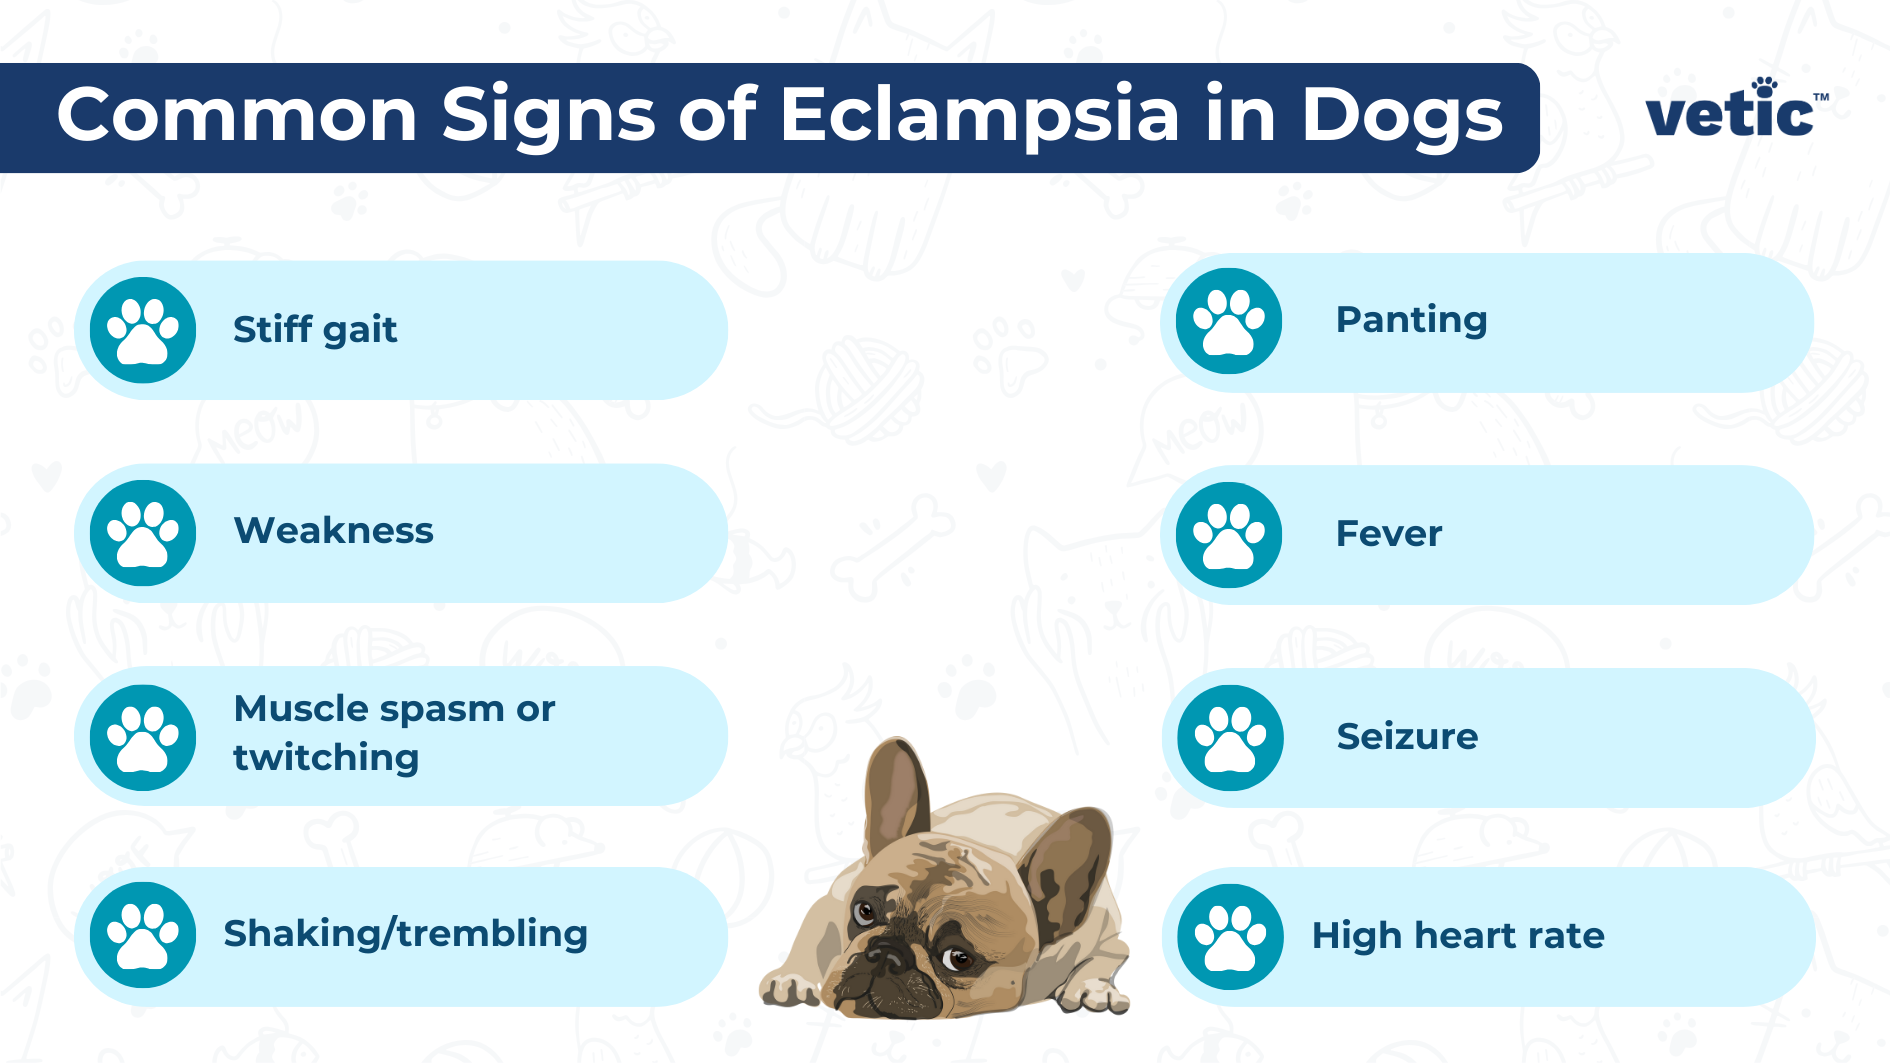 Infographic by Vetic on Common Signs of Eclampsia in Dogs Stiff gait Weakness Muscle spasm or twitching Shaking/trembling High heart rate Panting Fever Seizure